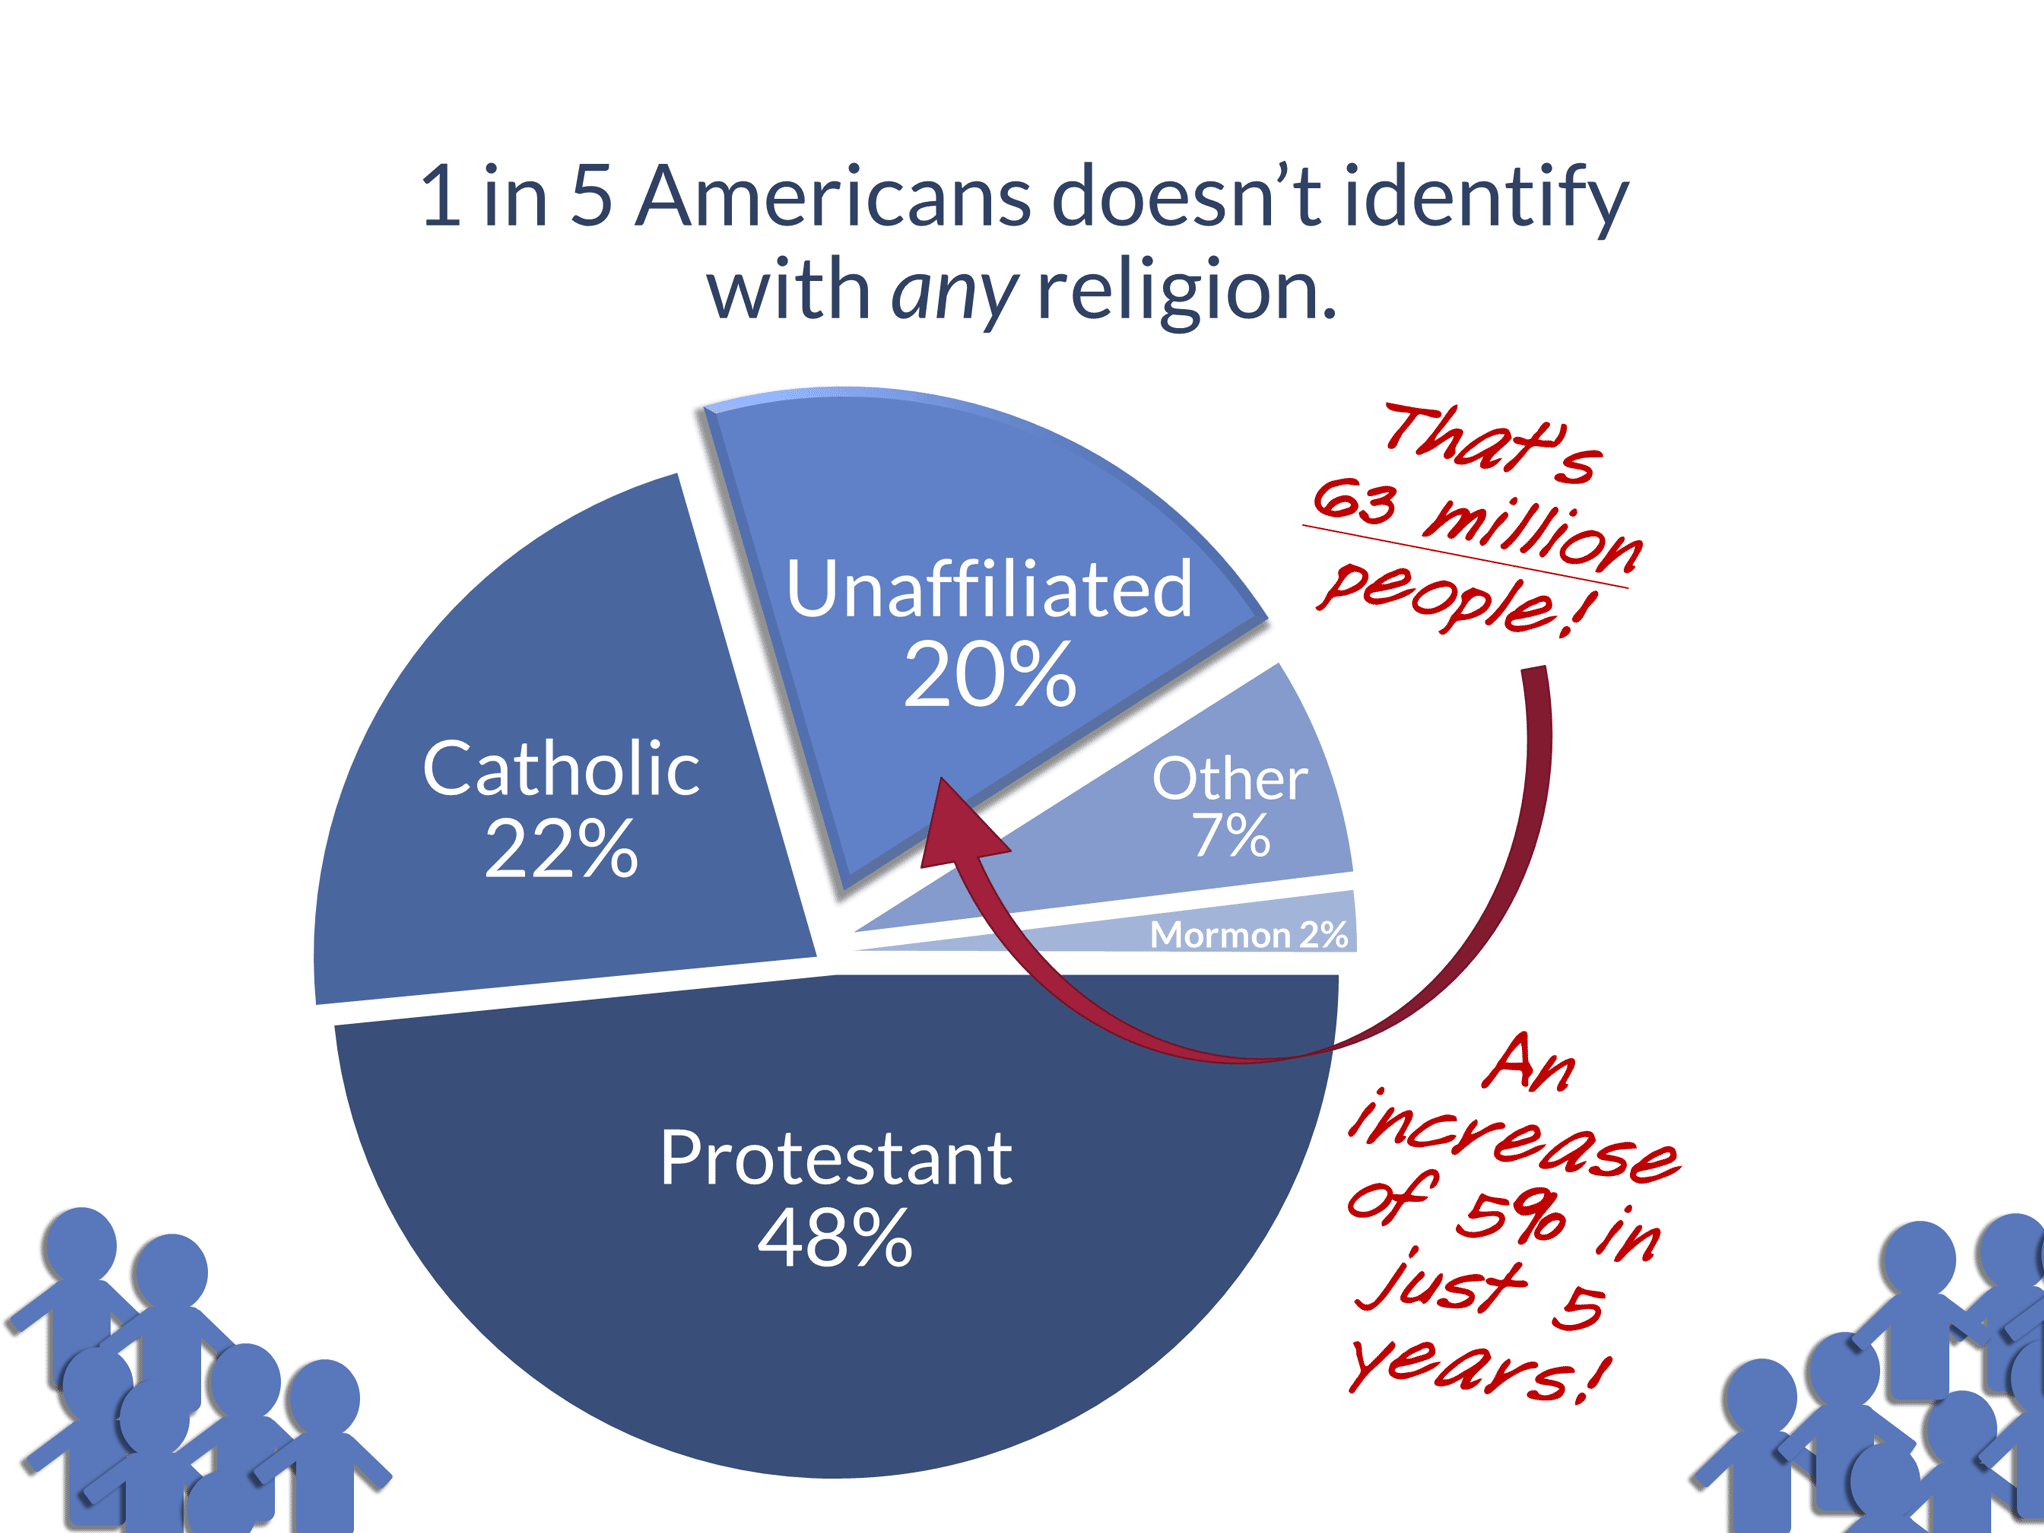 1 in 5 Americans doesn't identify with any religion. That's 63 million people! An increase of 5% in just 5 years! Unaffiliated 20%, Catholic 22%, Protestant 48%, Mormon 2%, Other 7%.